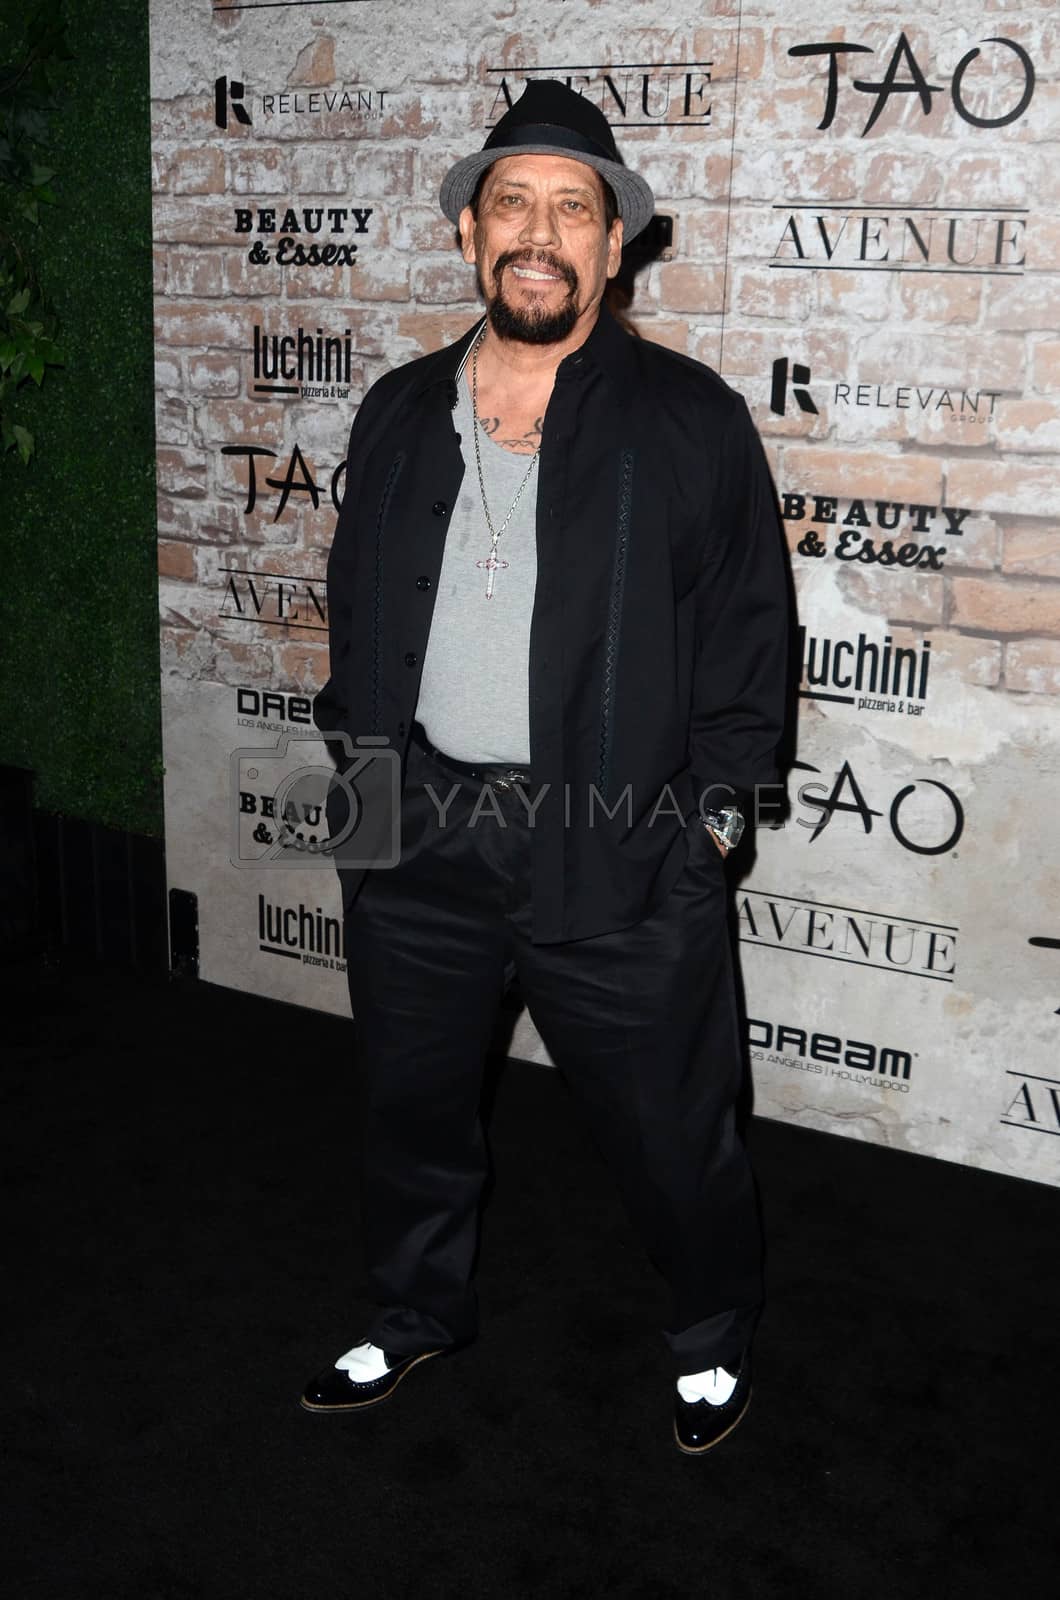 Royalty free image of Danny Trejo
at the TAO, Beauty & Essex, Avenue and Luchini Grand Opening, Hollywood, CA 03-16-17/ImageCollect by ImageCollect